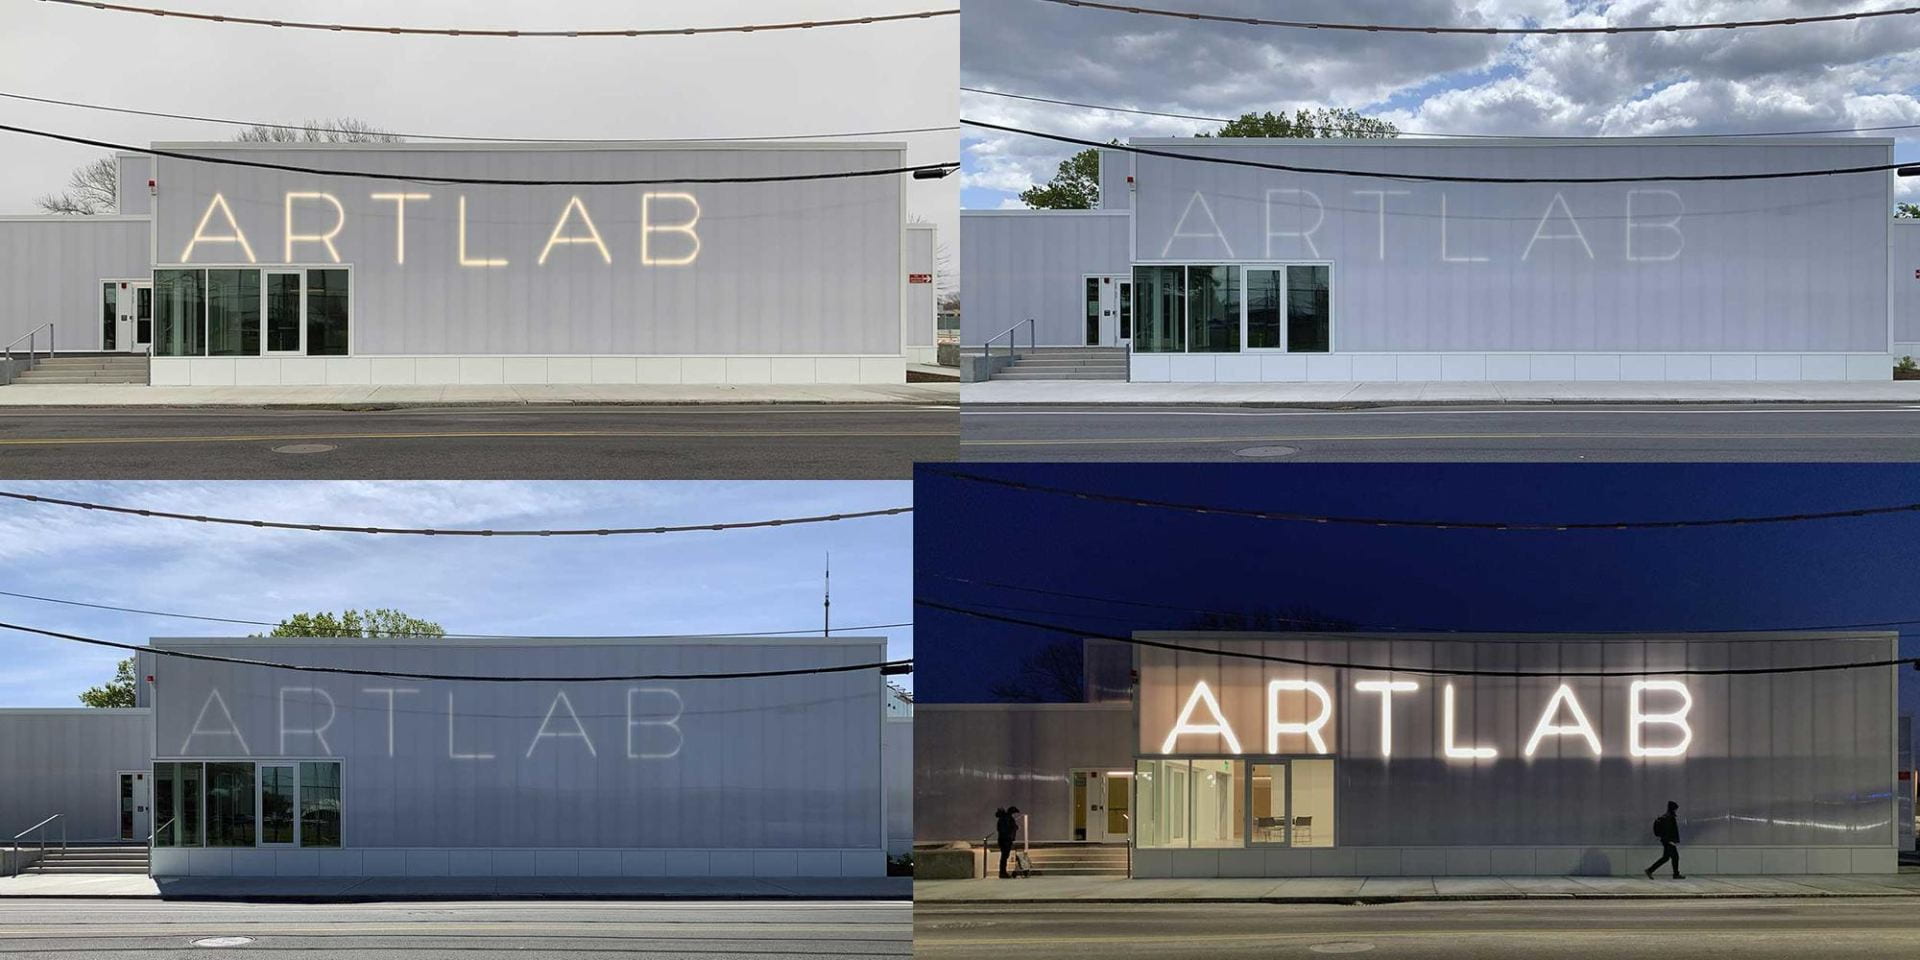 A grid of the ArtLab building facade at different times of the day